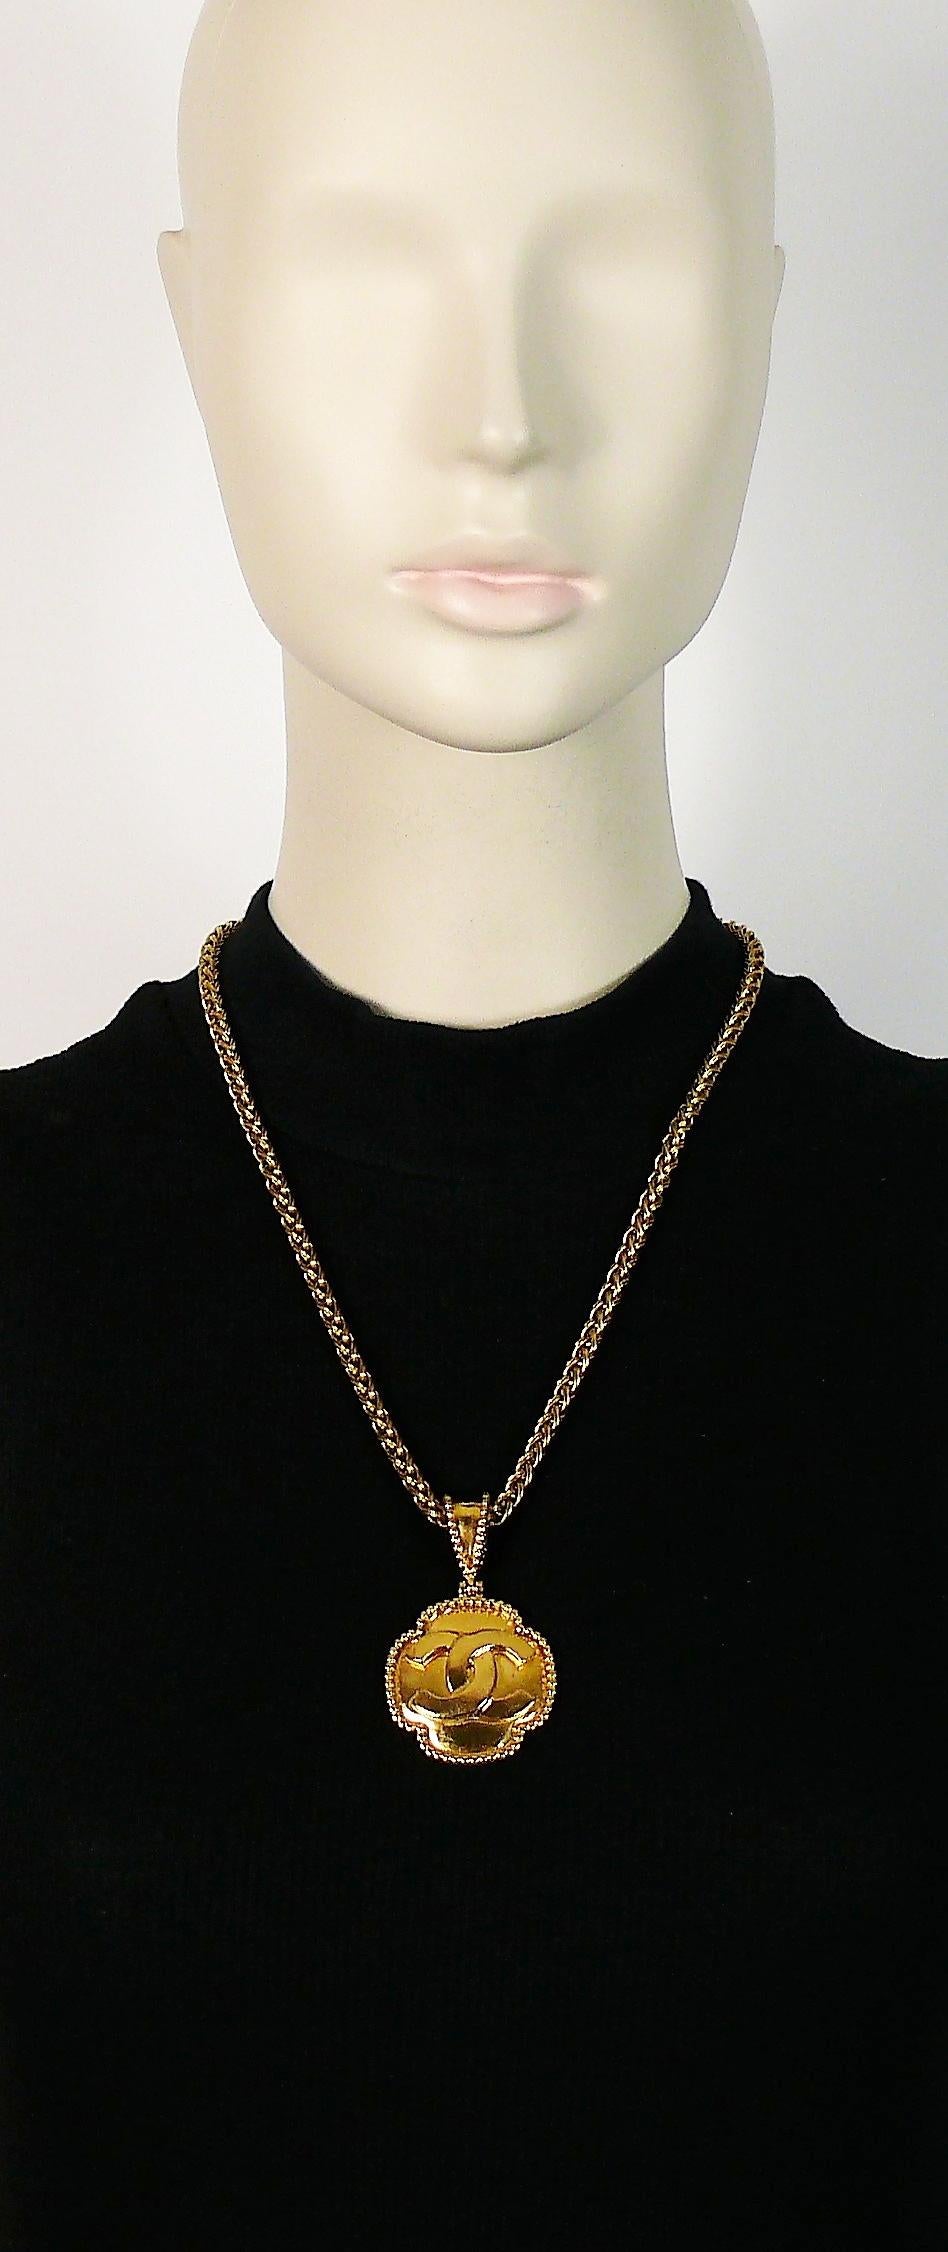 CHANEL vintage 1996 gold toned necklace featuring a CC logo pendant.

Gold toned wheat chain.
Hook clasp closure with CC logo details.

Autumn/Winter 1996 Collection.

Embossed CHANEL 96 A Made in France.

Indicative measurements : chain length